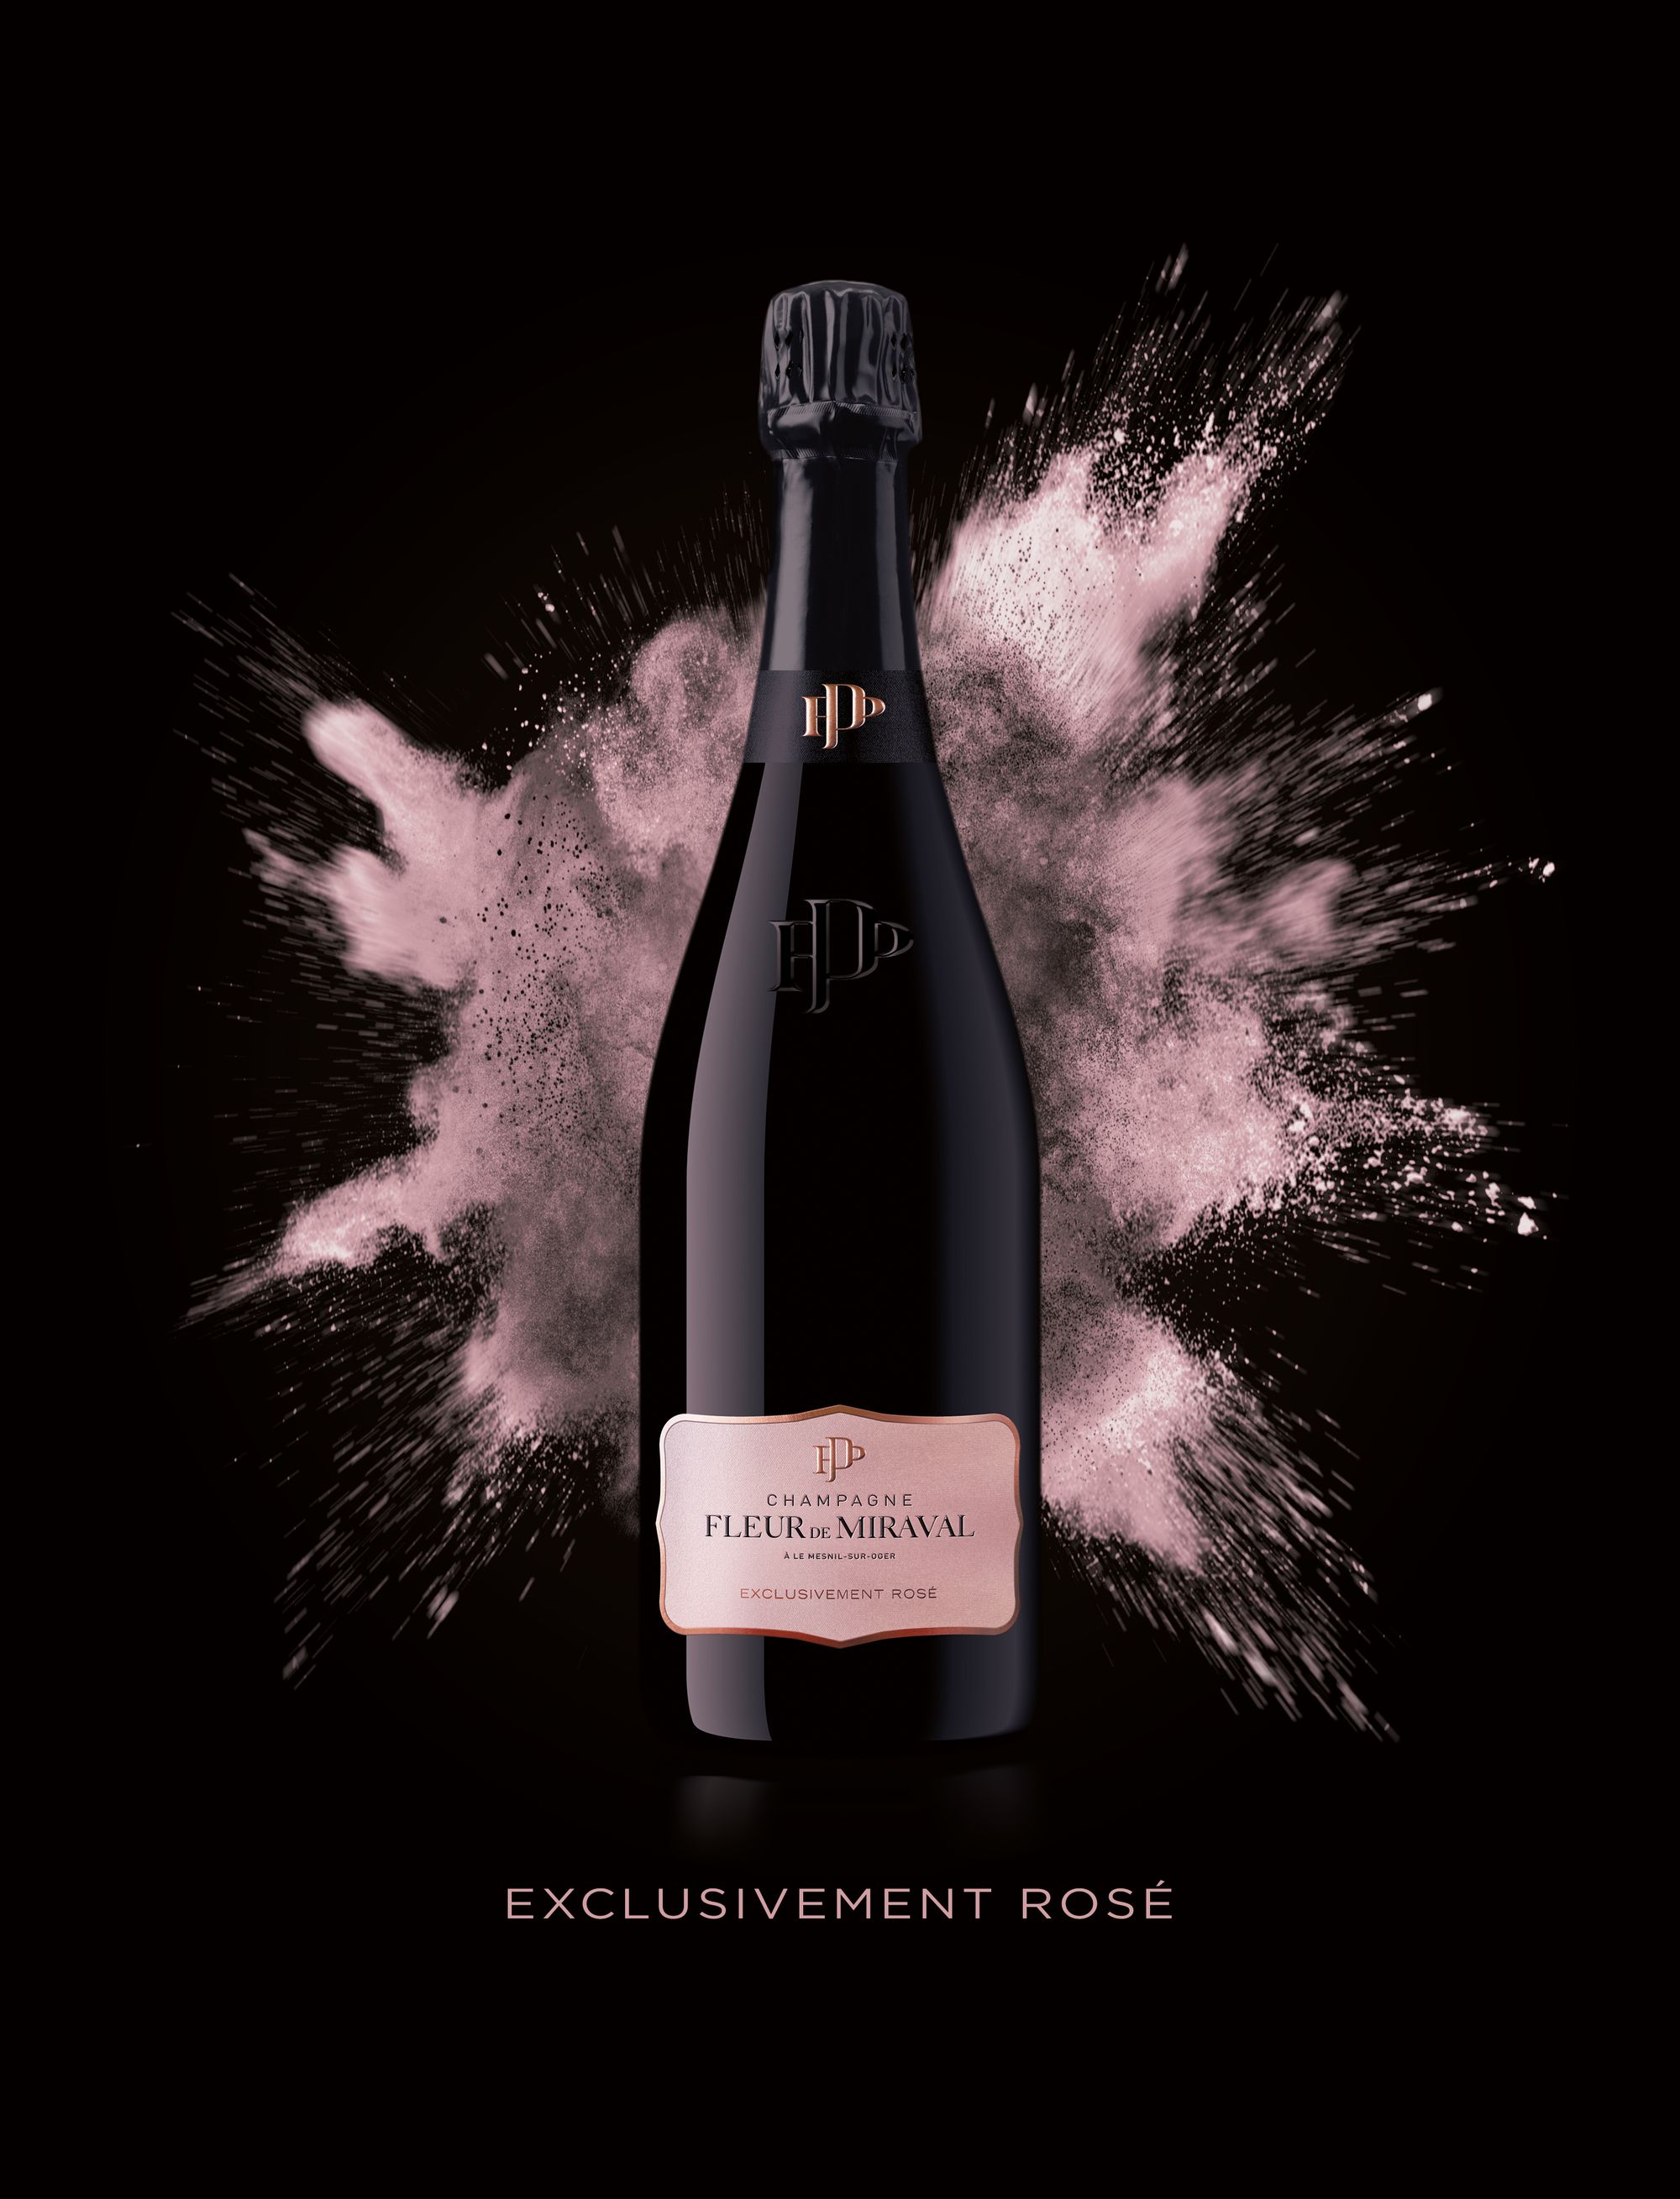 FLEUR DE MIRAVAL ER2 Once Again Pushes the Boundaries of the Art of Rosé in Champagne